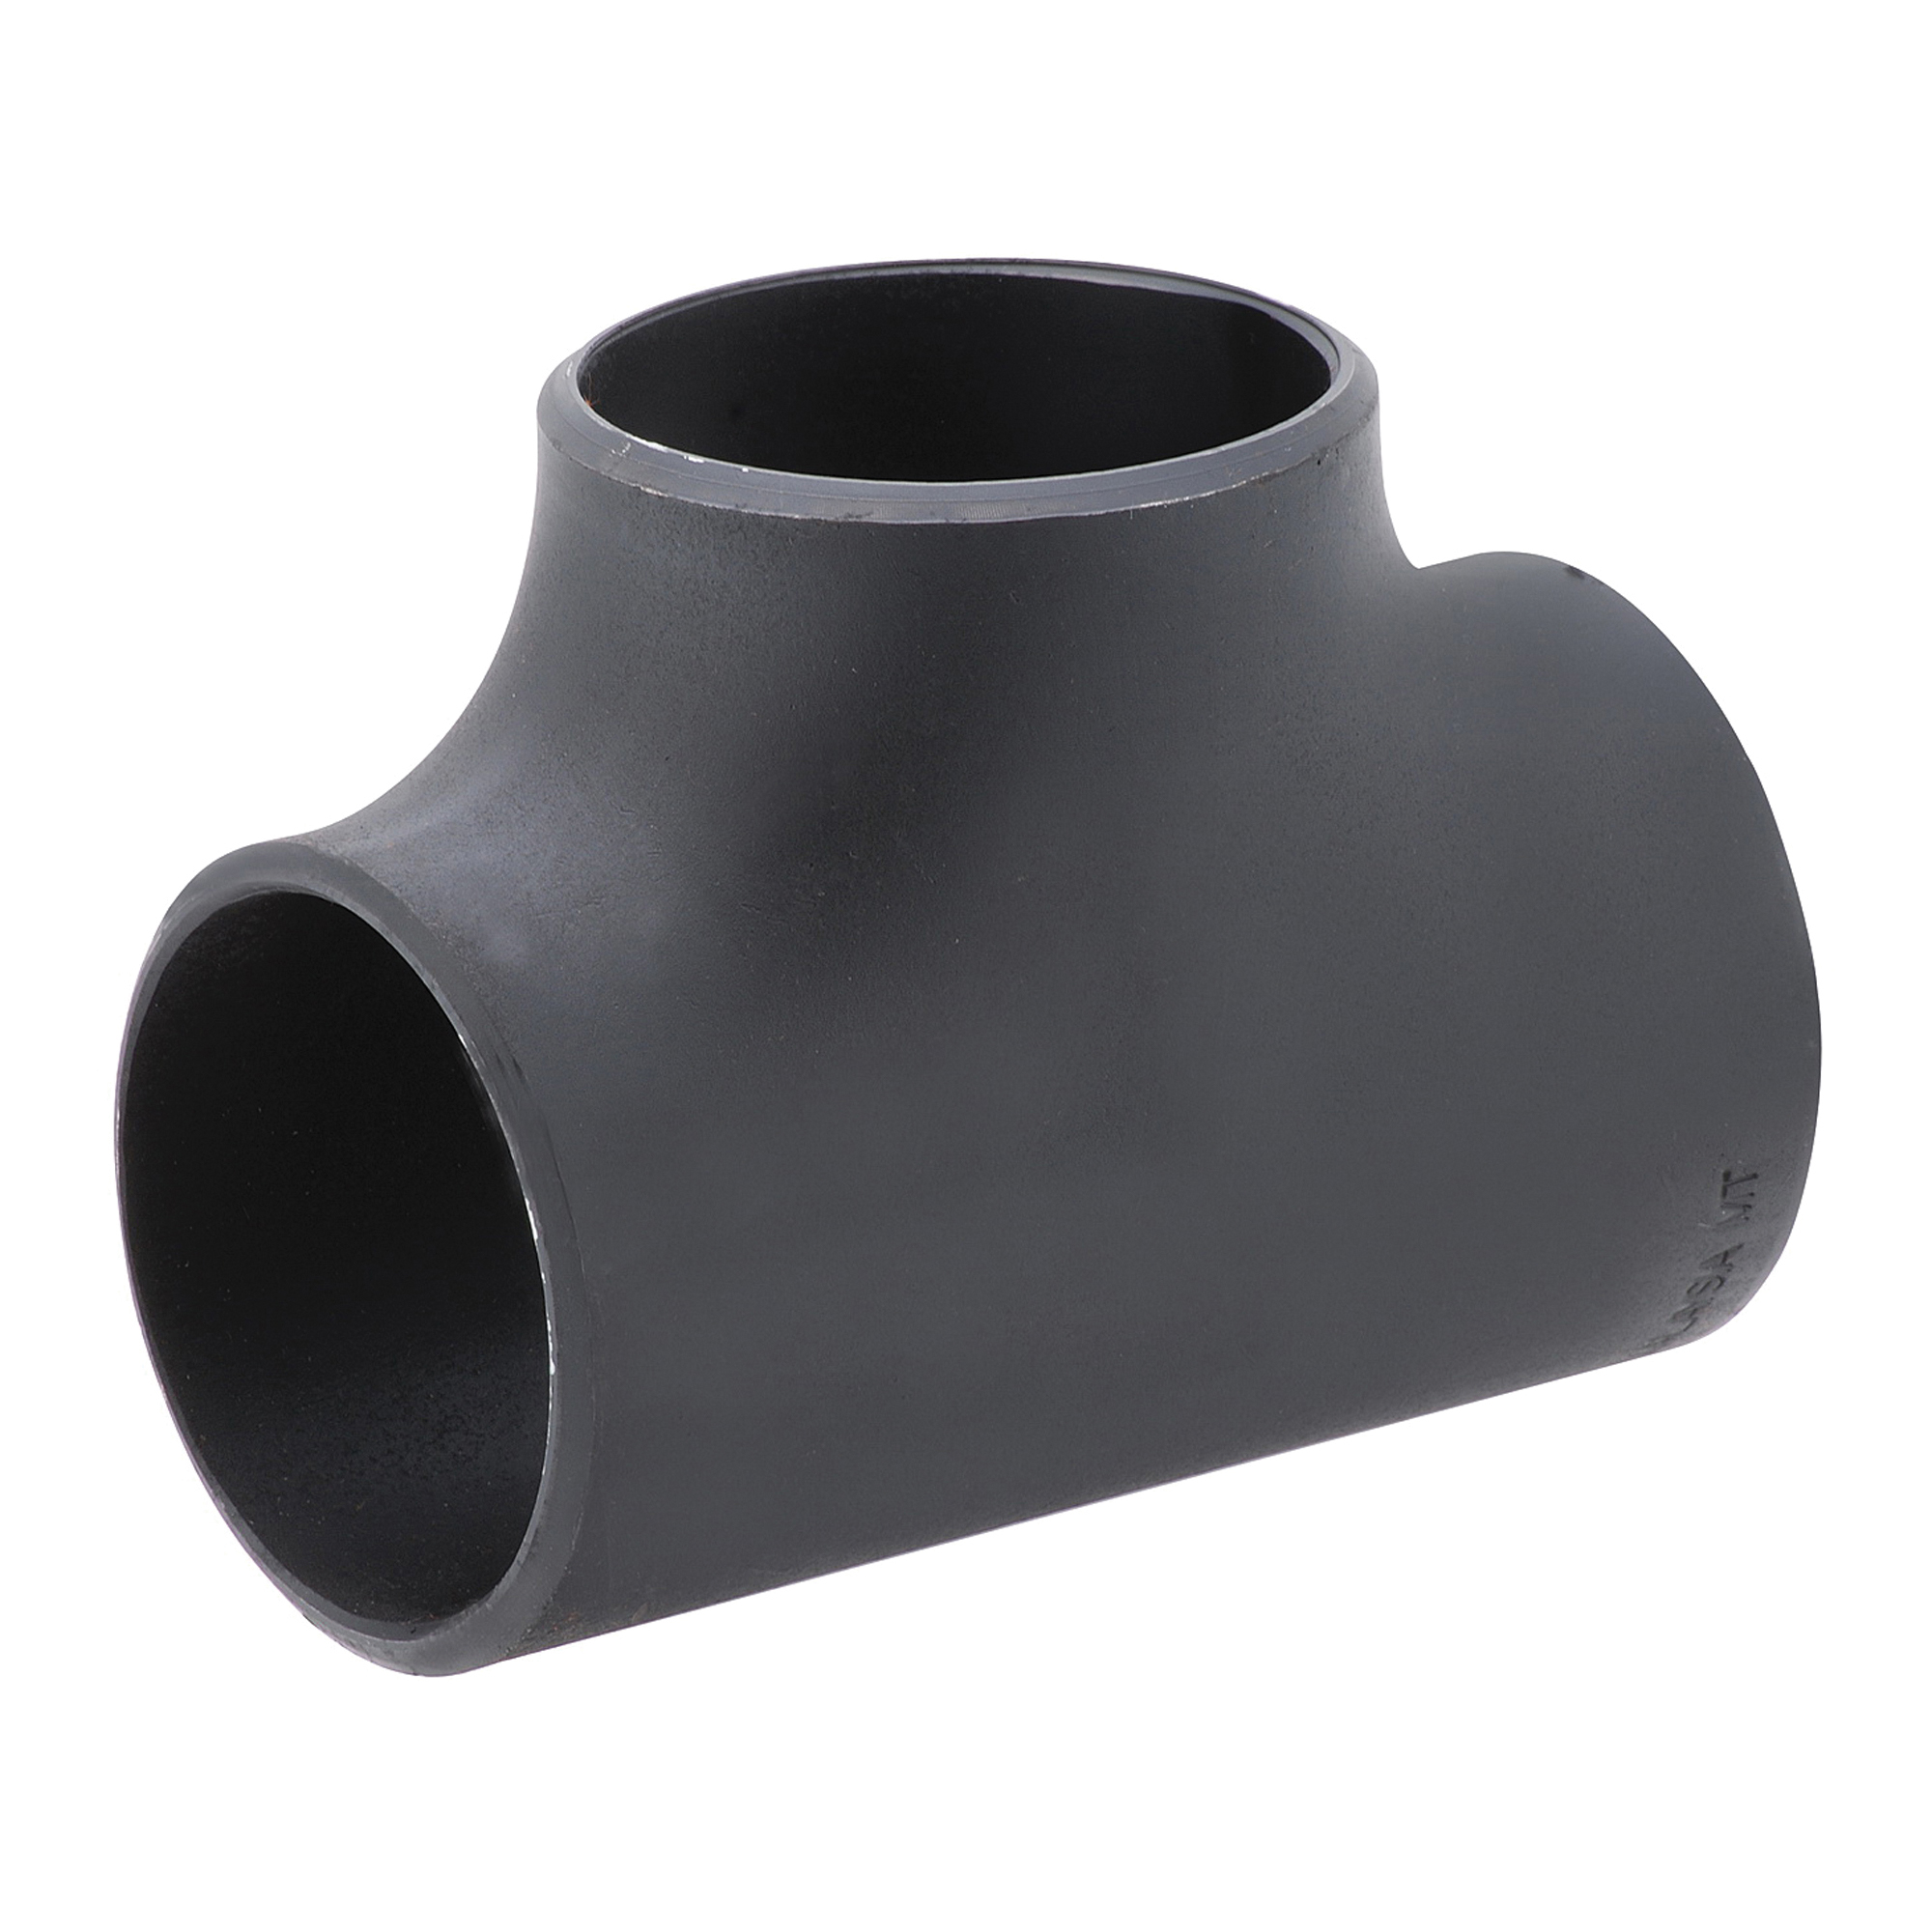 Matco-Norca™ MNT04 Pipe Tee, 3/4 in, SCH 40/STD - Carbon Steel Pipe Fittings